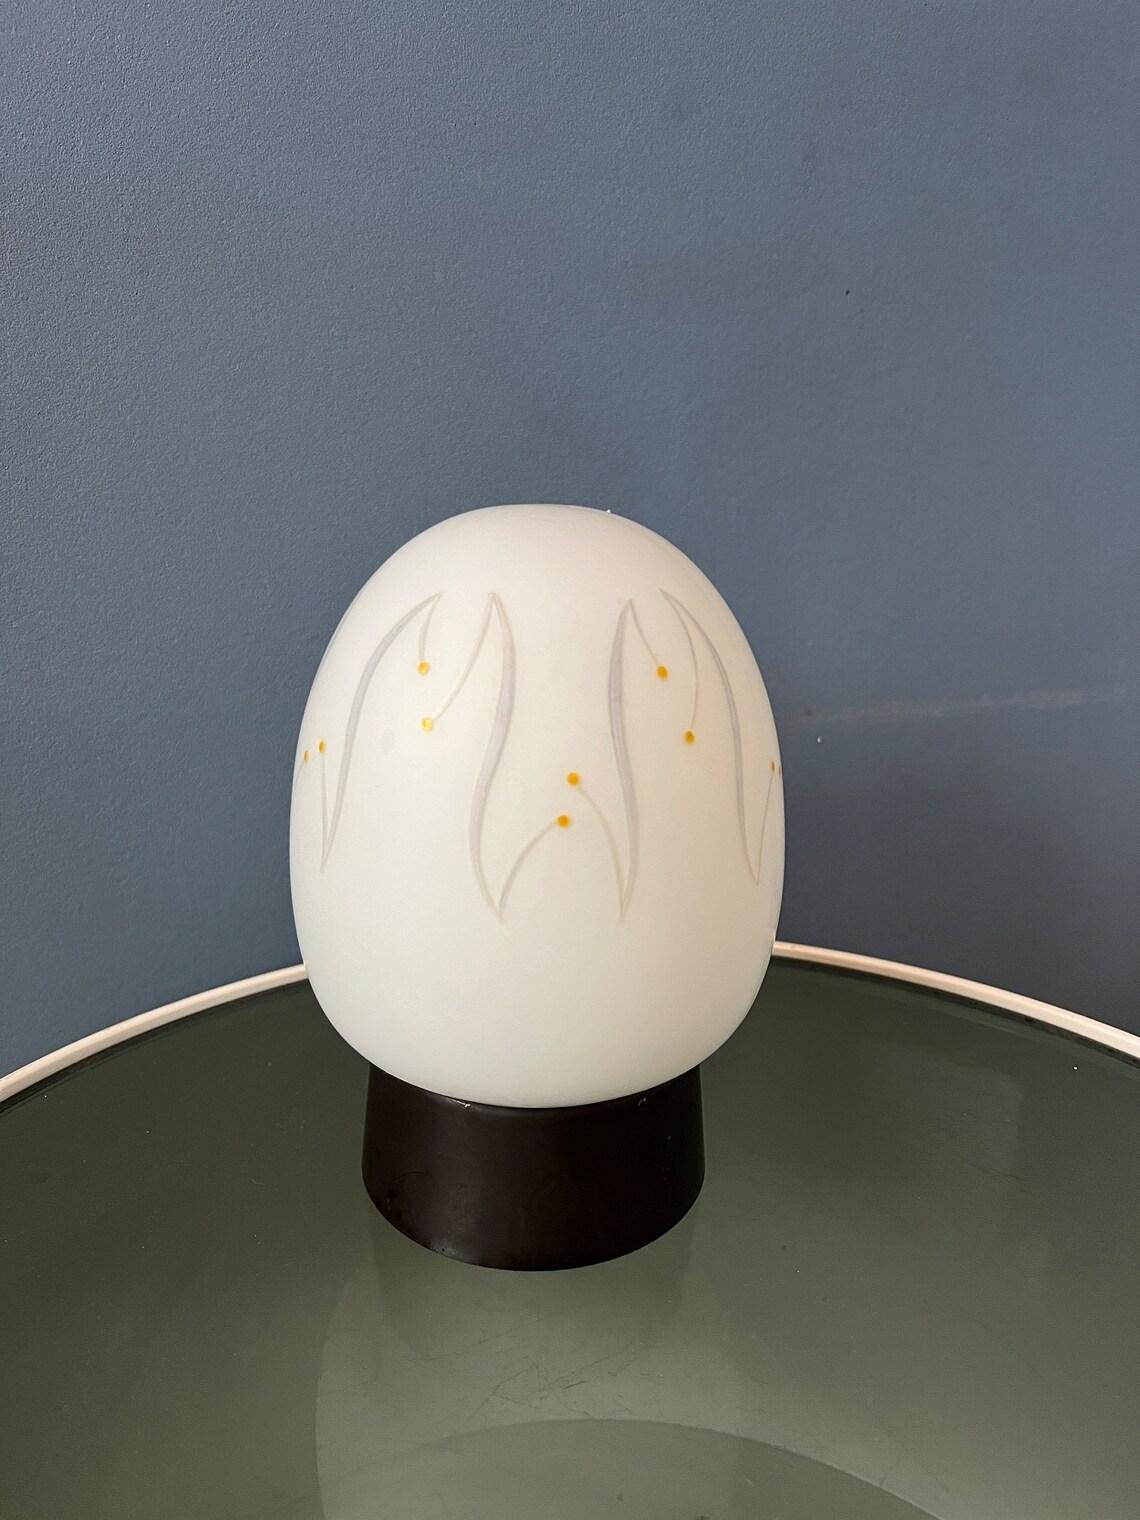 Vintage Egg Thabur Ceiling Lamp with Decorative Pattern, 1970s For Sale 3